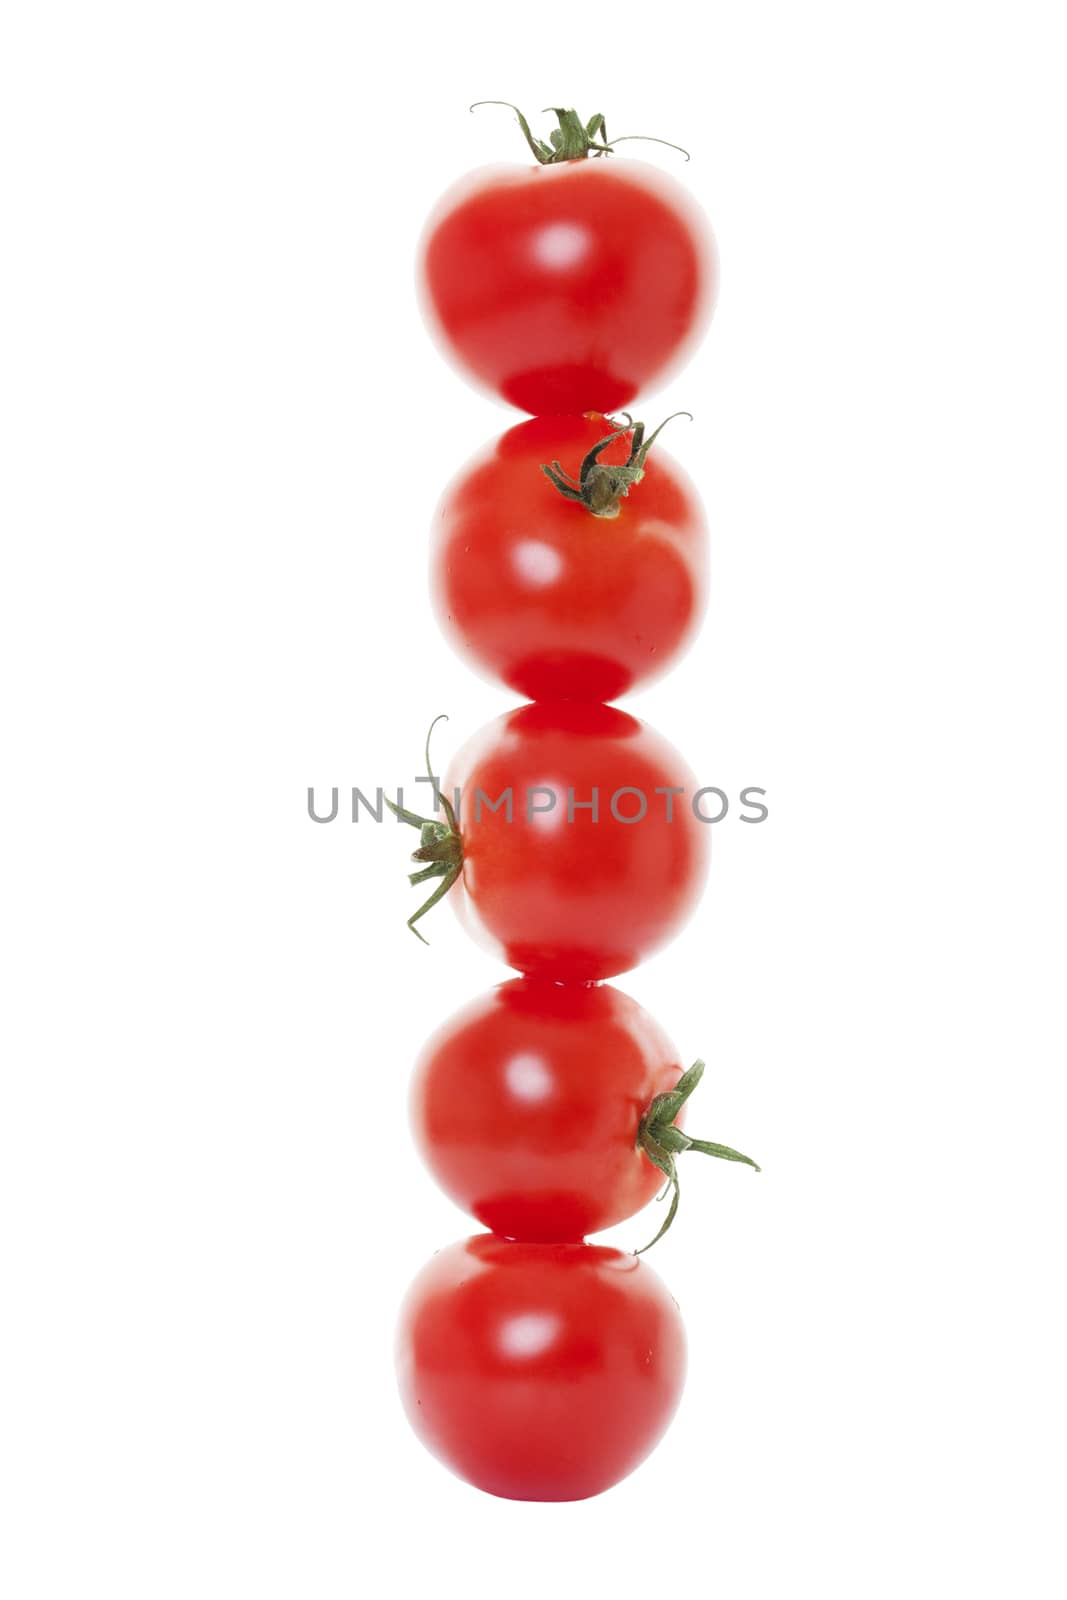 Stacked Tomatoes by songbird839